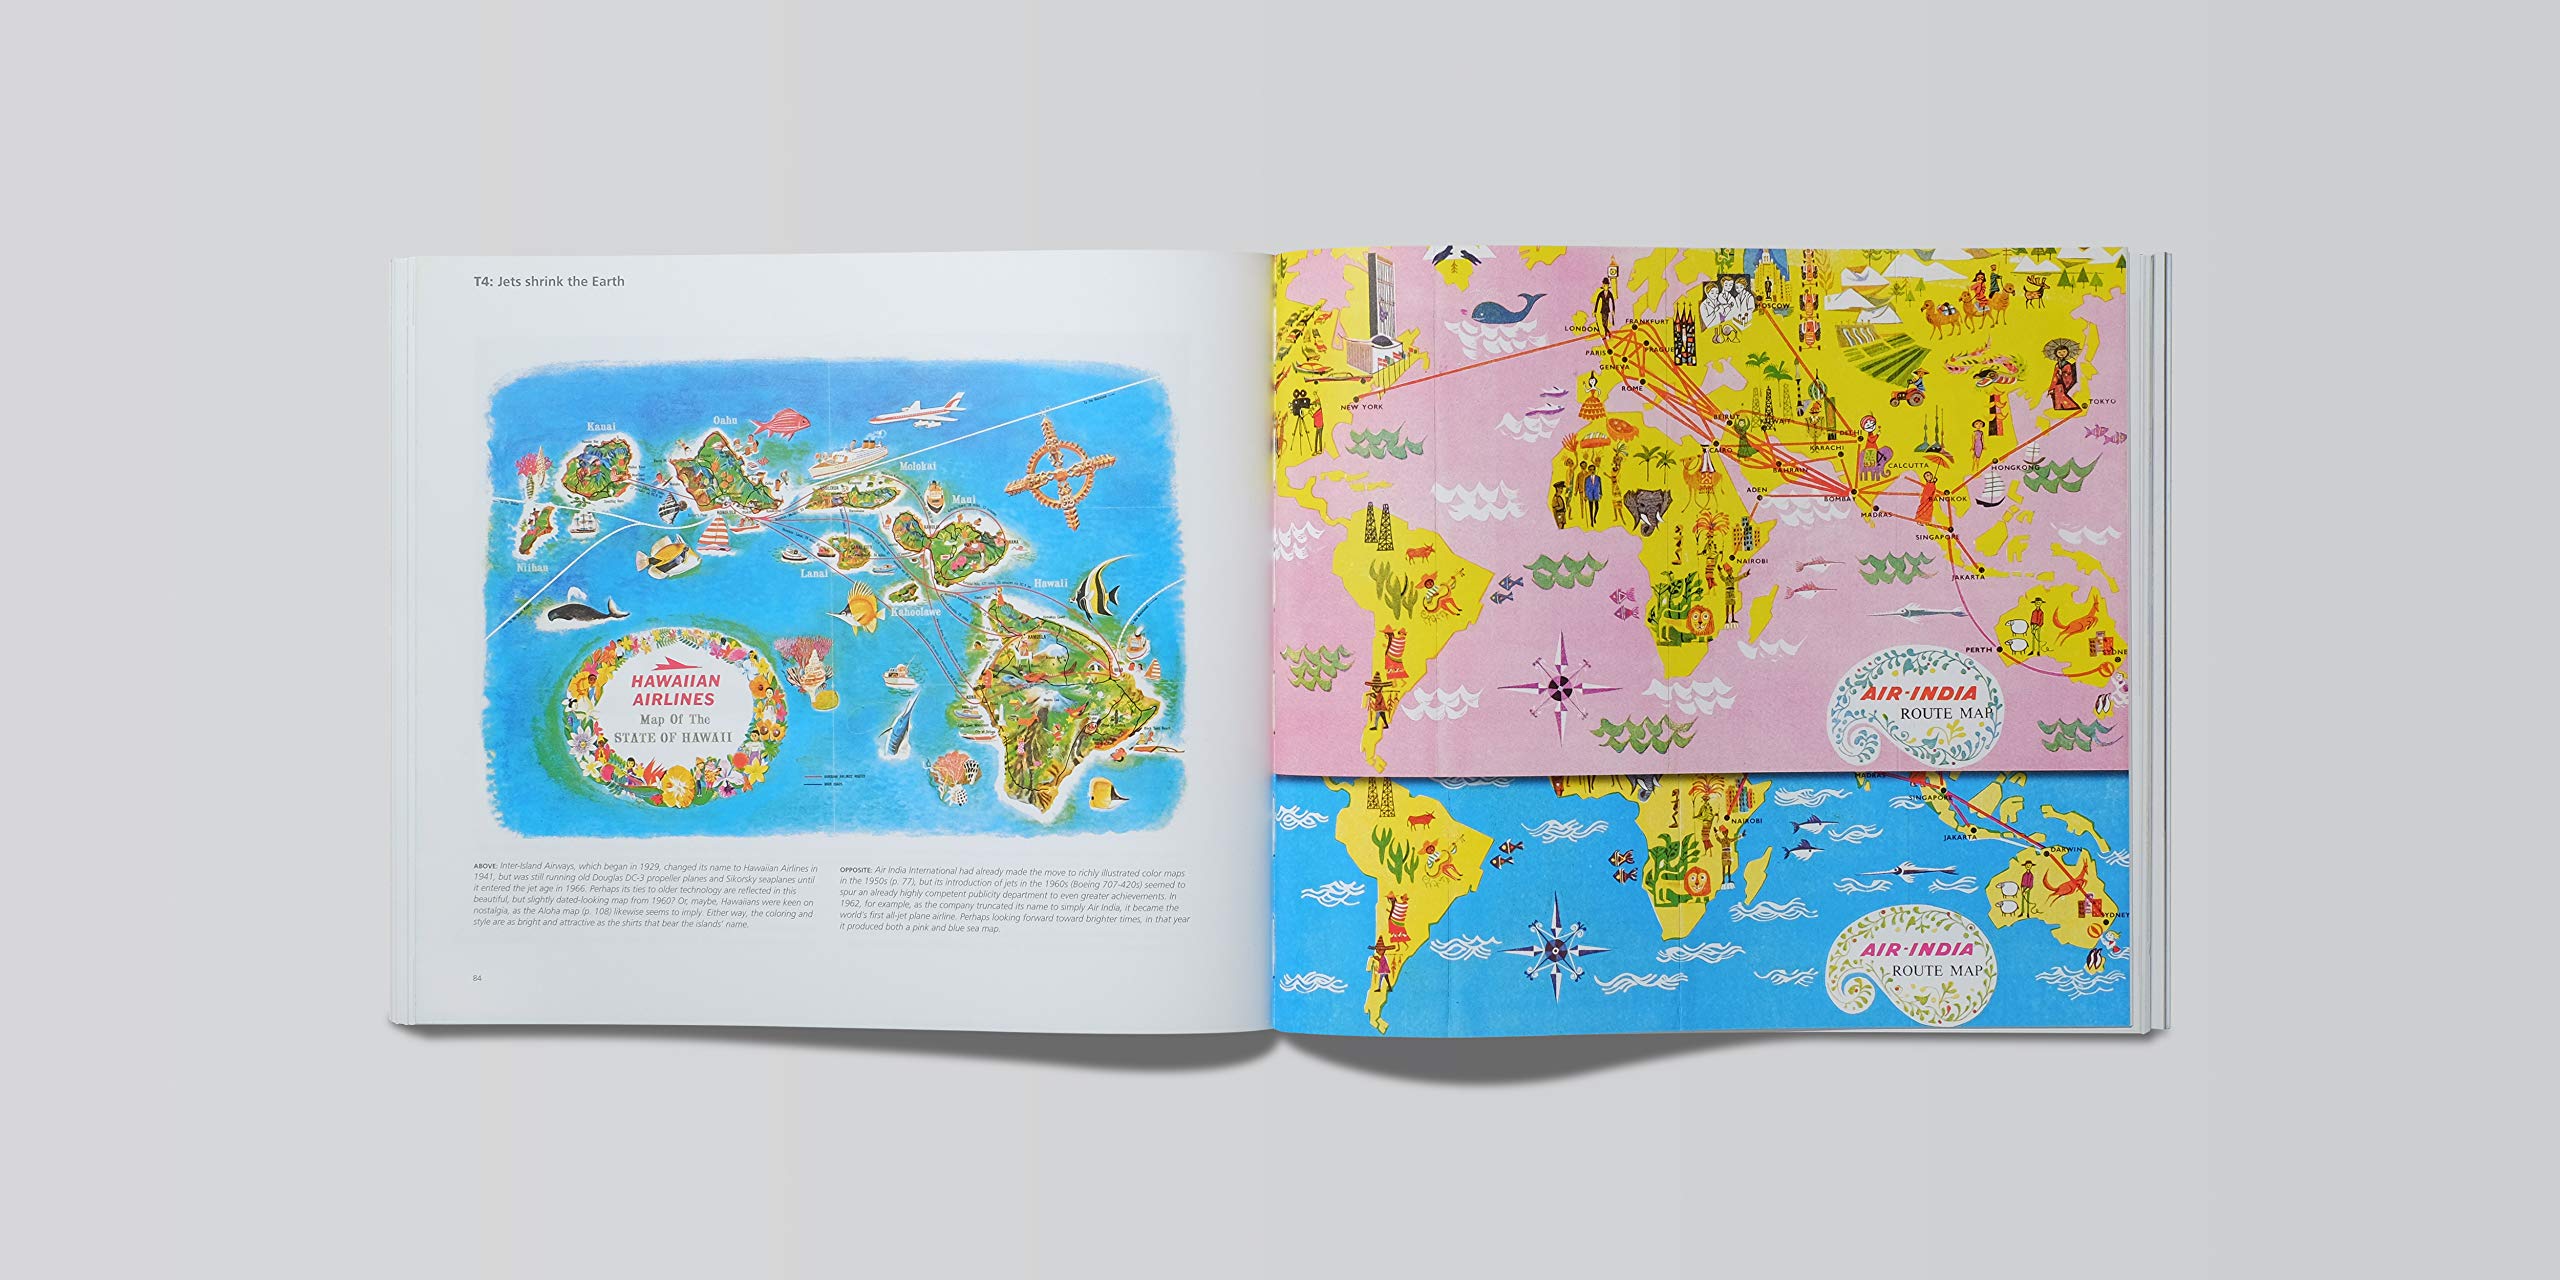 Airline Maps - A Century of Art and Design